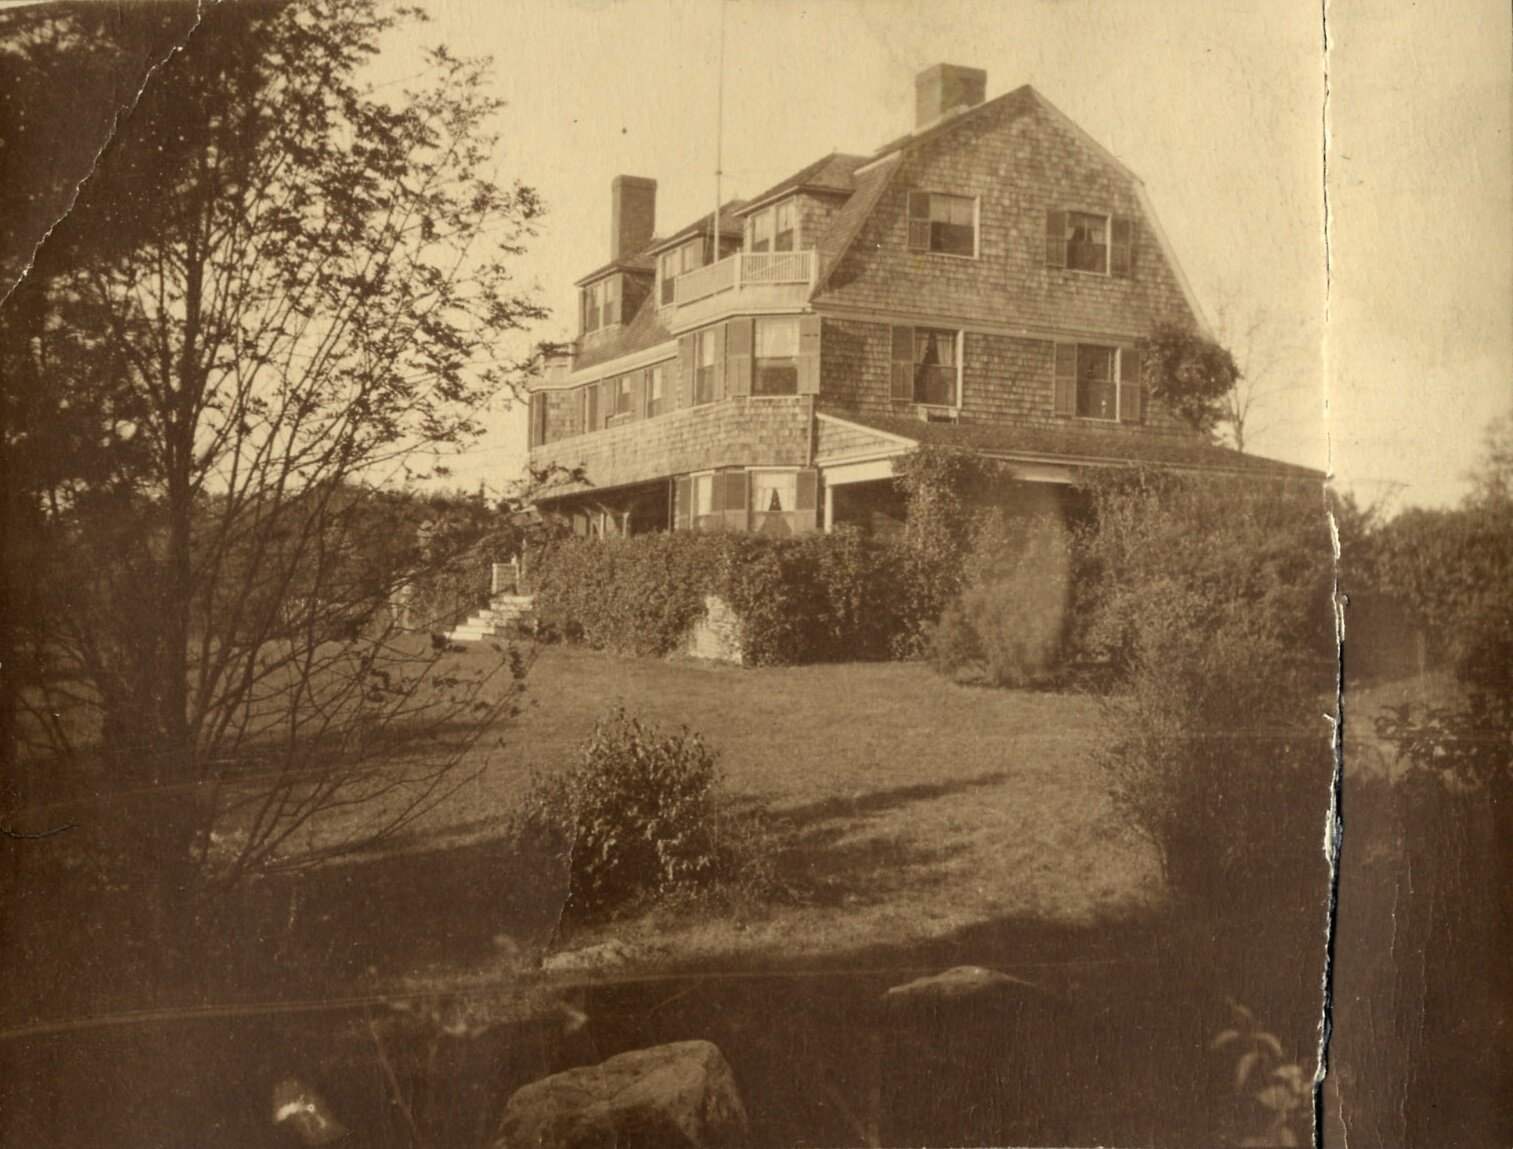 Lost: Ferncroft, the John and Edith Paine Storer House (Shepley, Rutan and Coolidge, 1892, demolished)